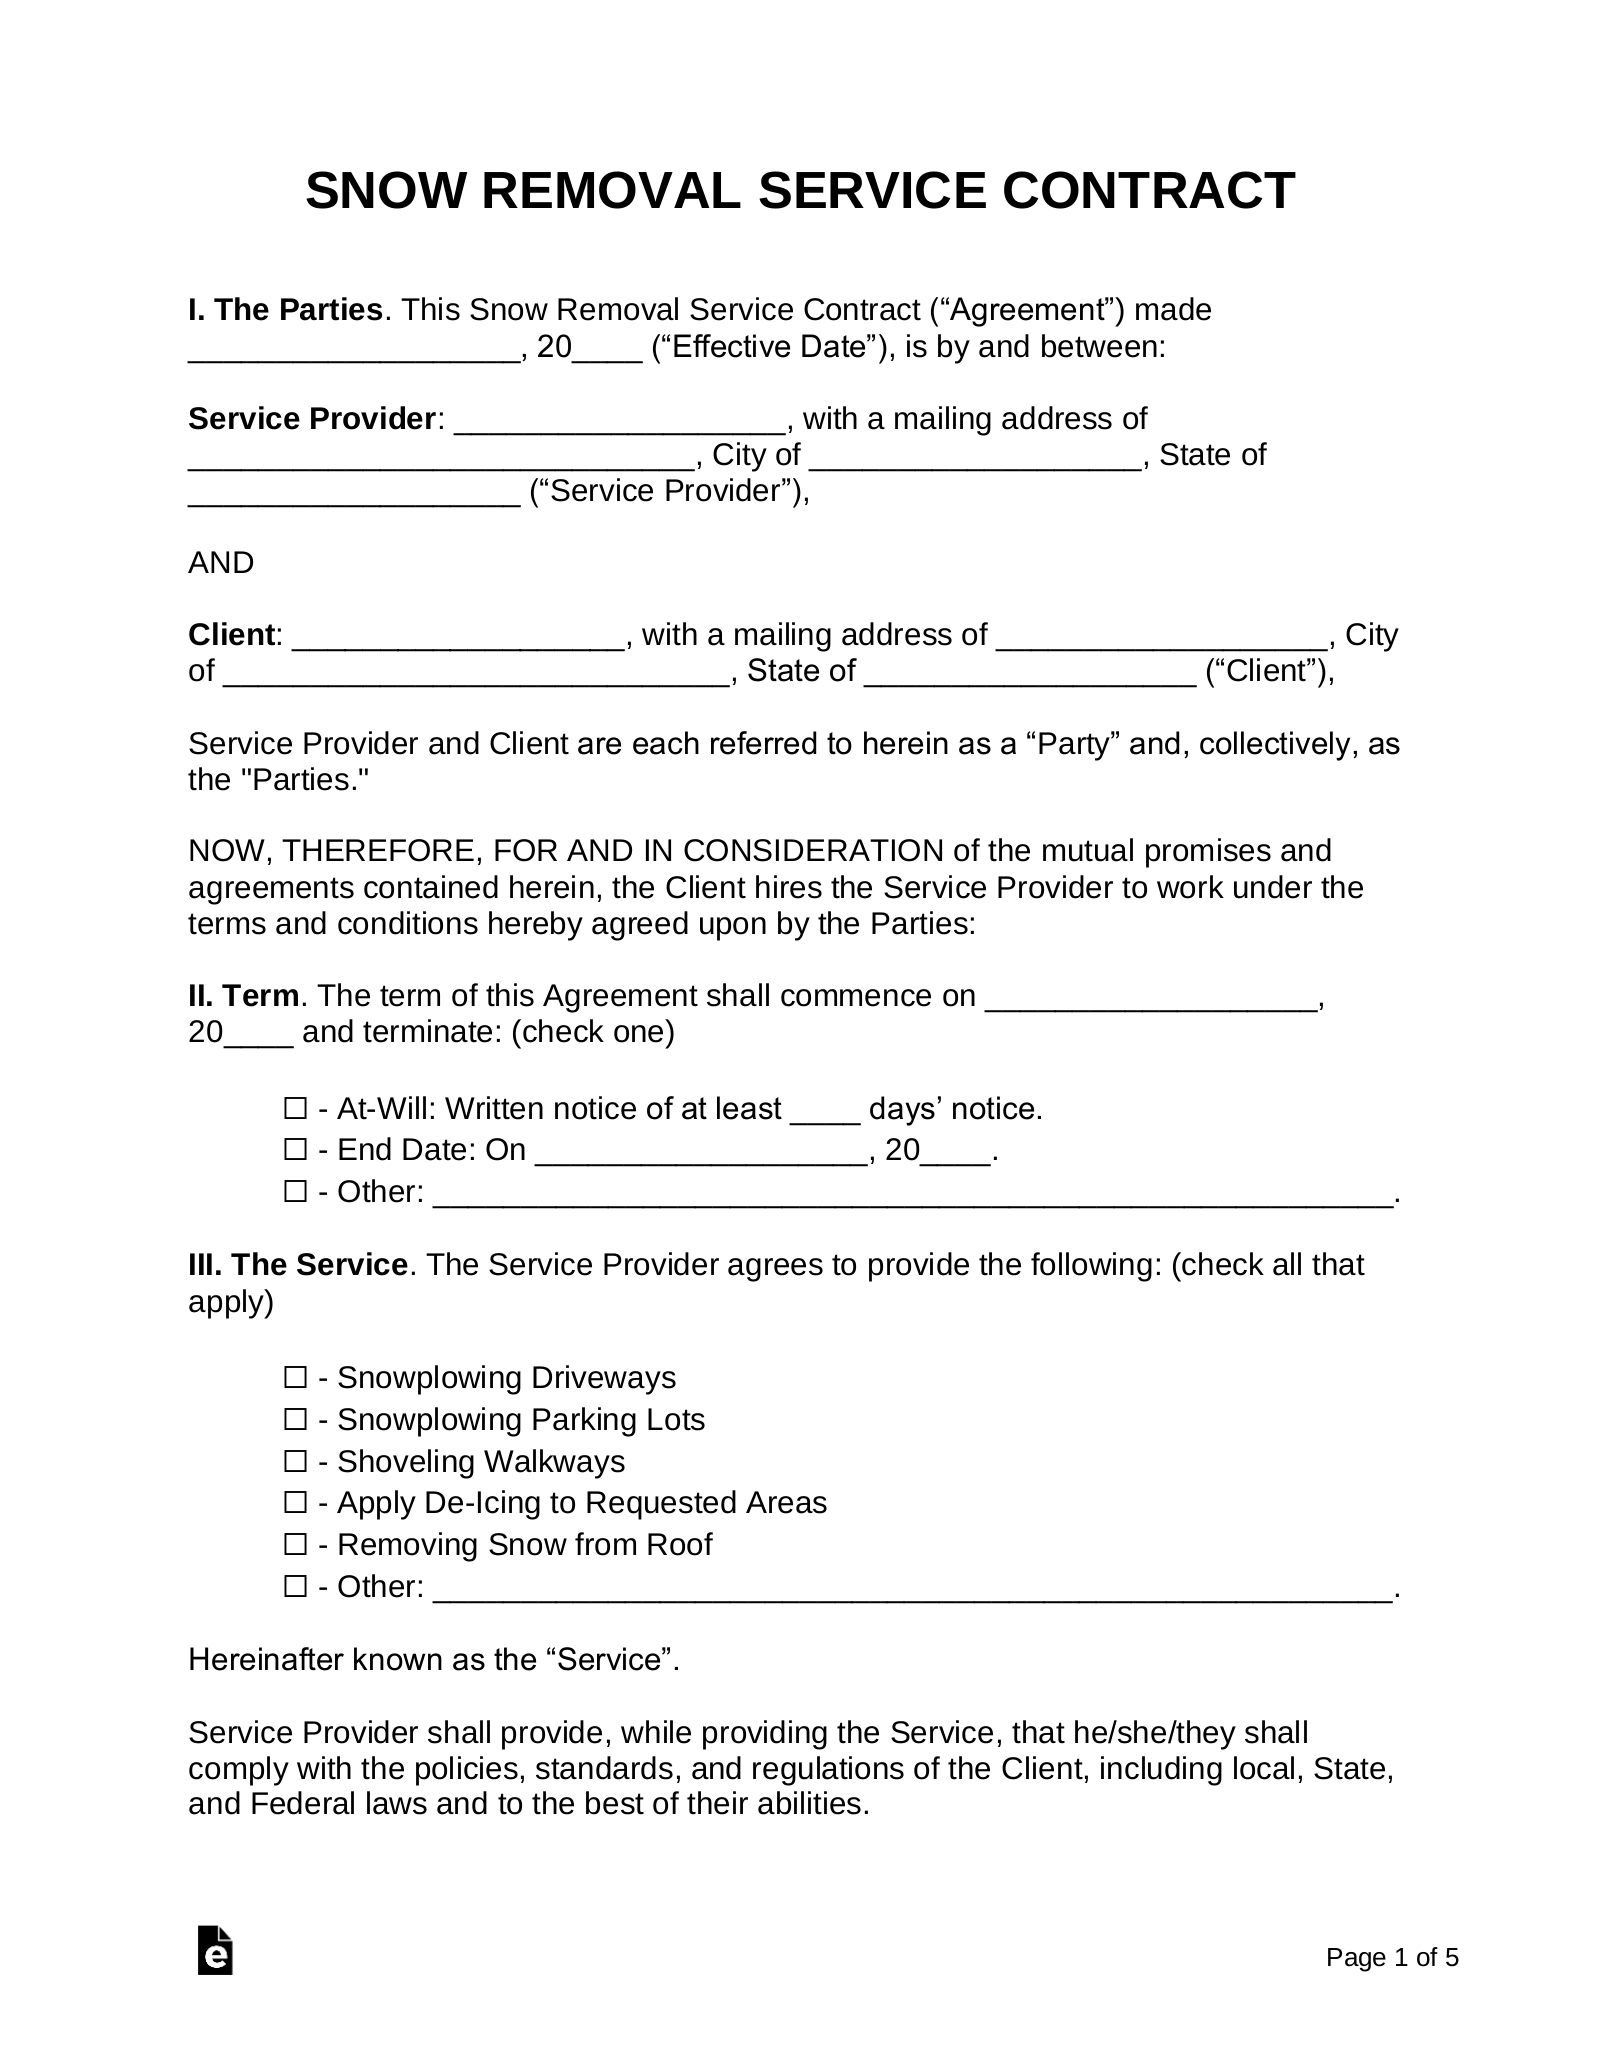 Snow Removal Contract Template | Samples (3)